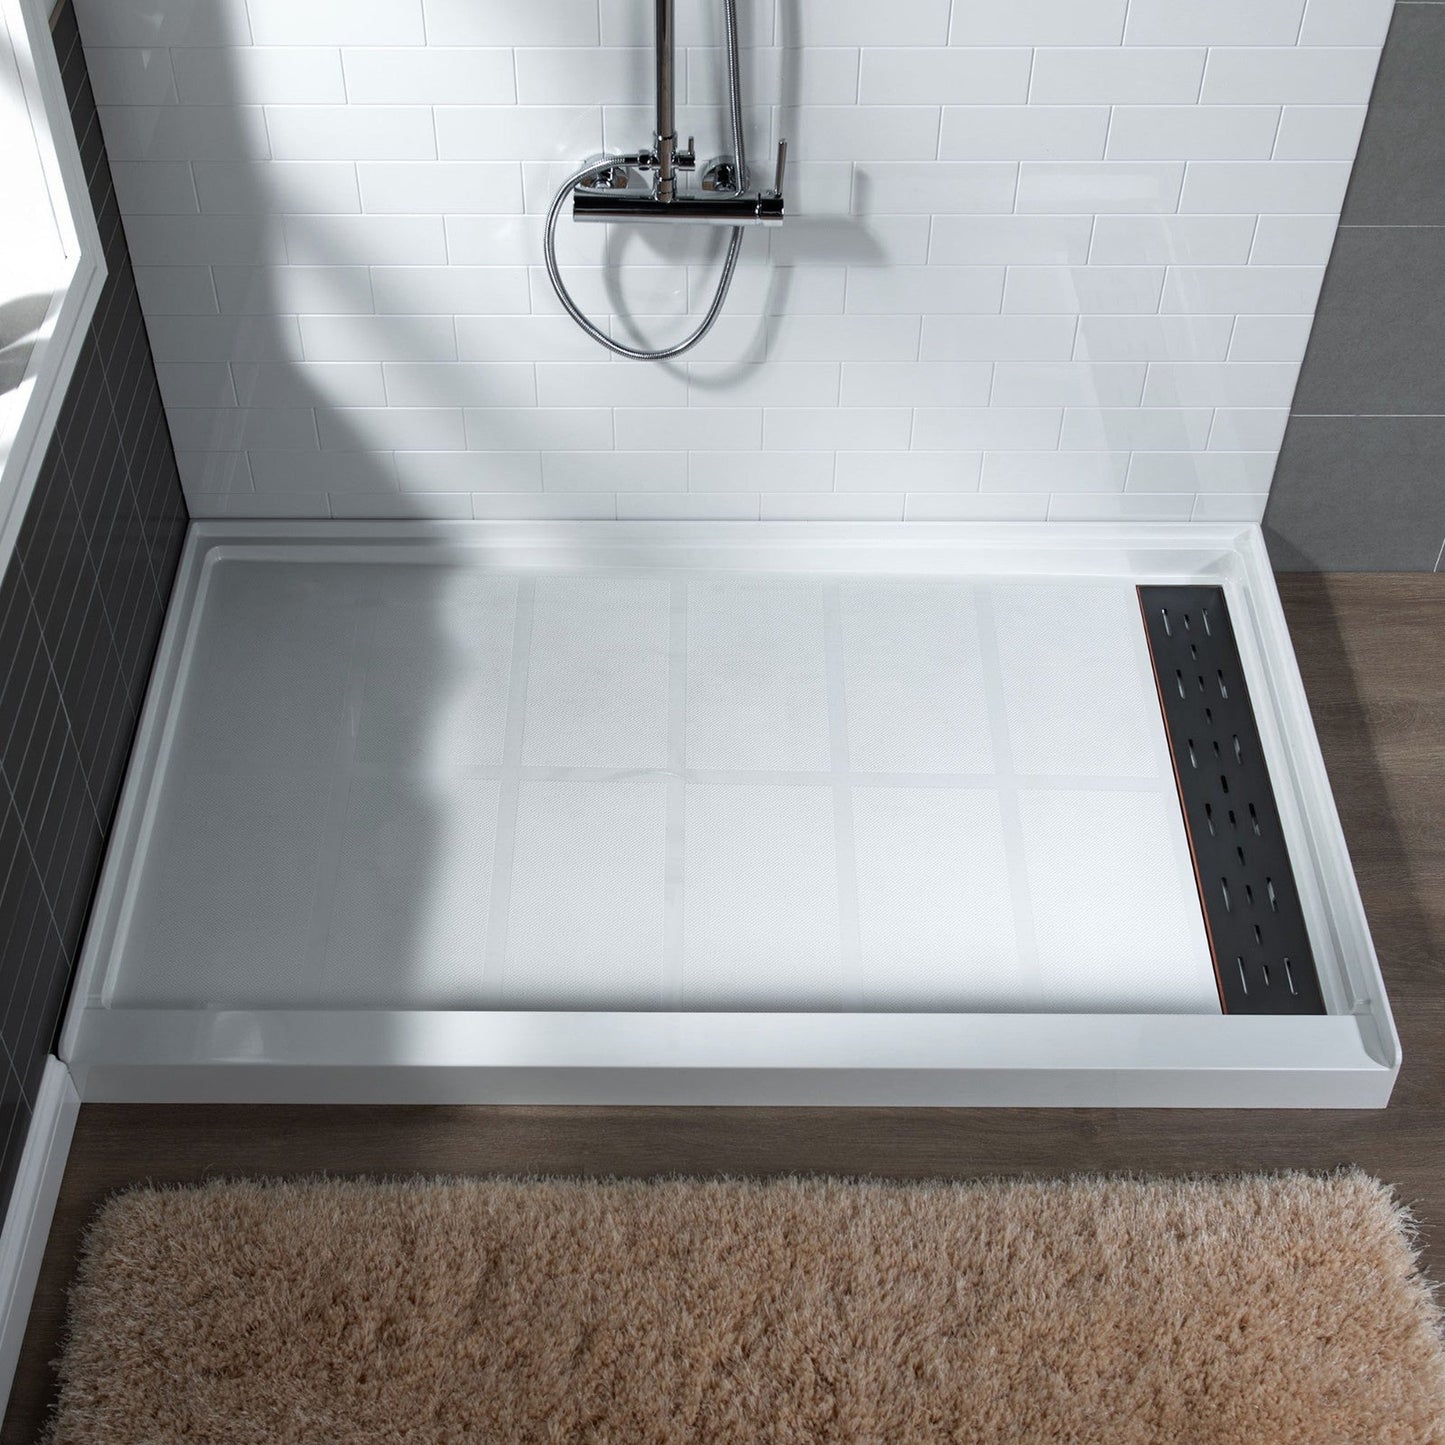 WoodBridge 60" x 34" White Solid Surface Shower Base Right Drain Location With Oil Rubbed Bronze Trench Drain Cover